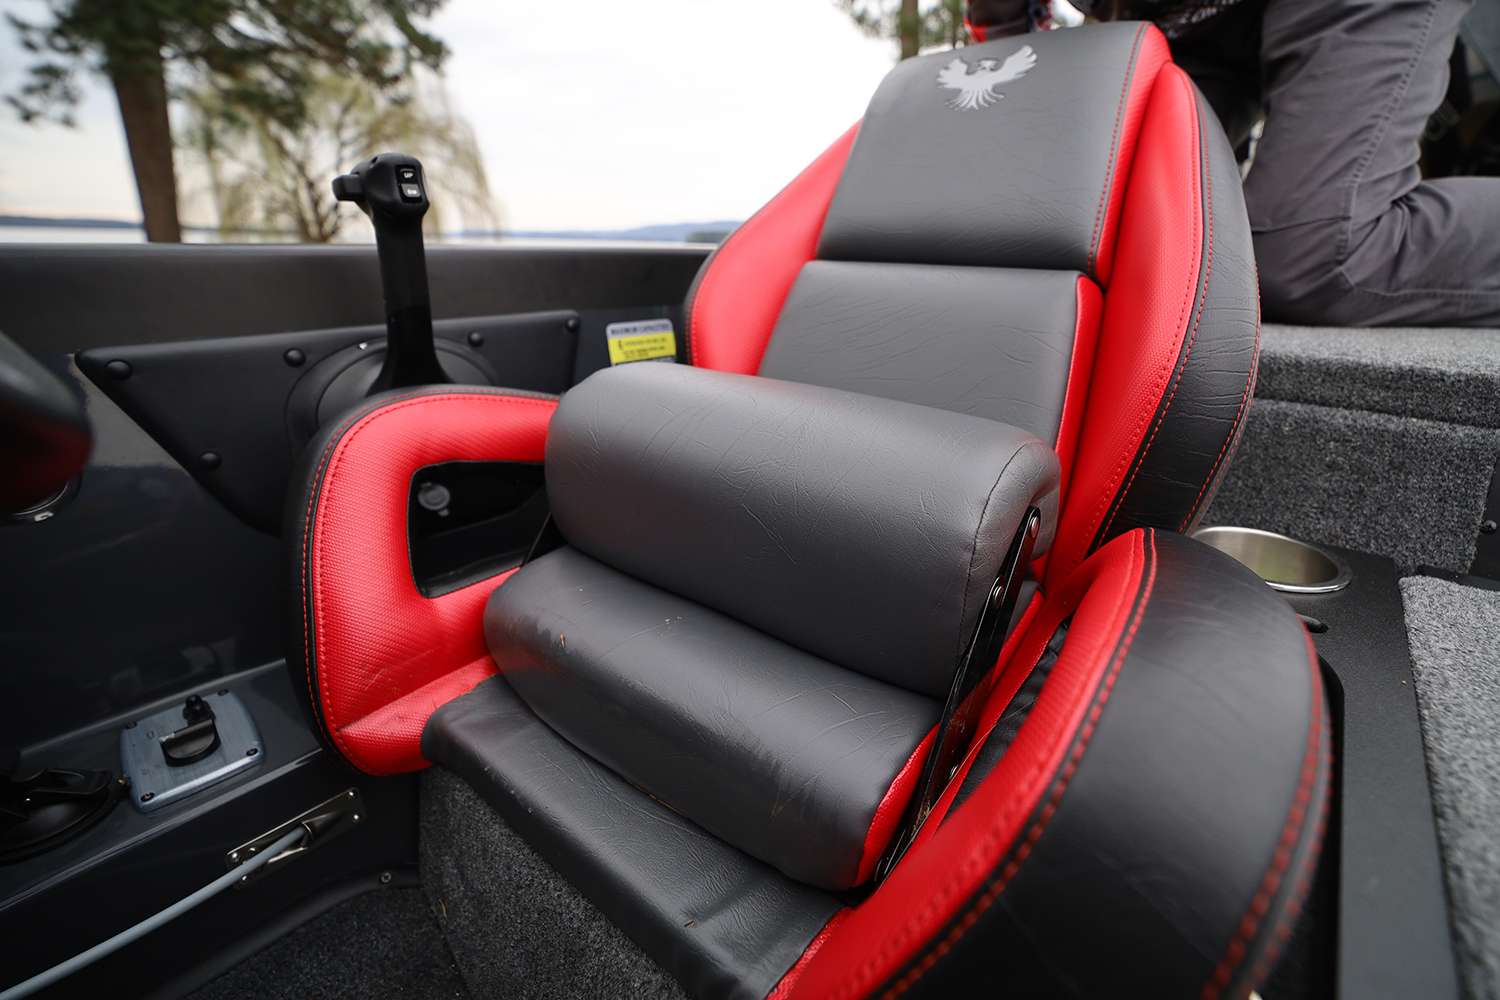 The Phoenix boat seats are also over engineered for comfort and application. If riding in big waves, you can lift the front of the seat up into a lifted position. Making it easier to see and avoid splashing. 